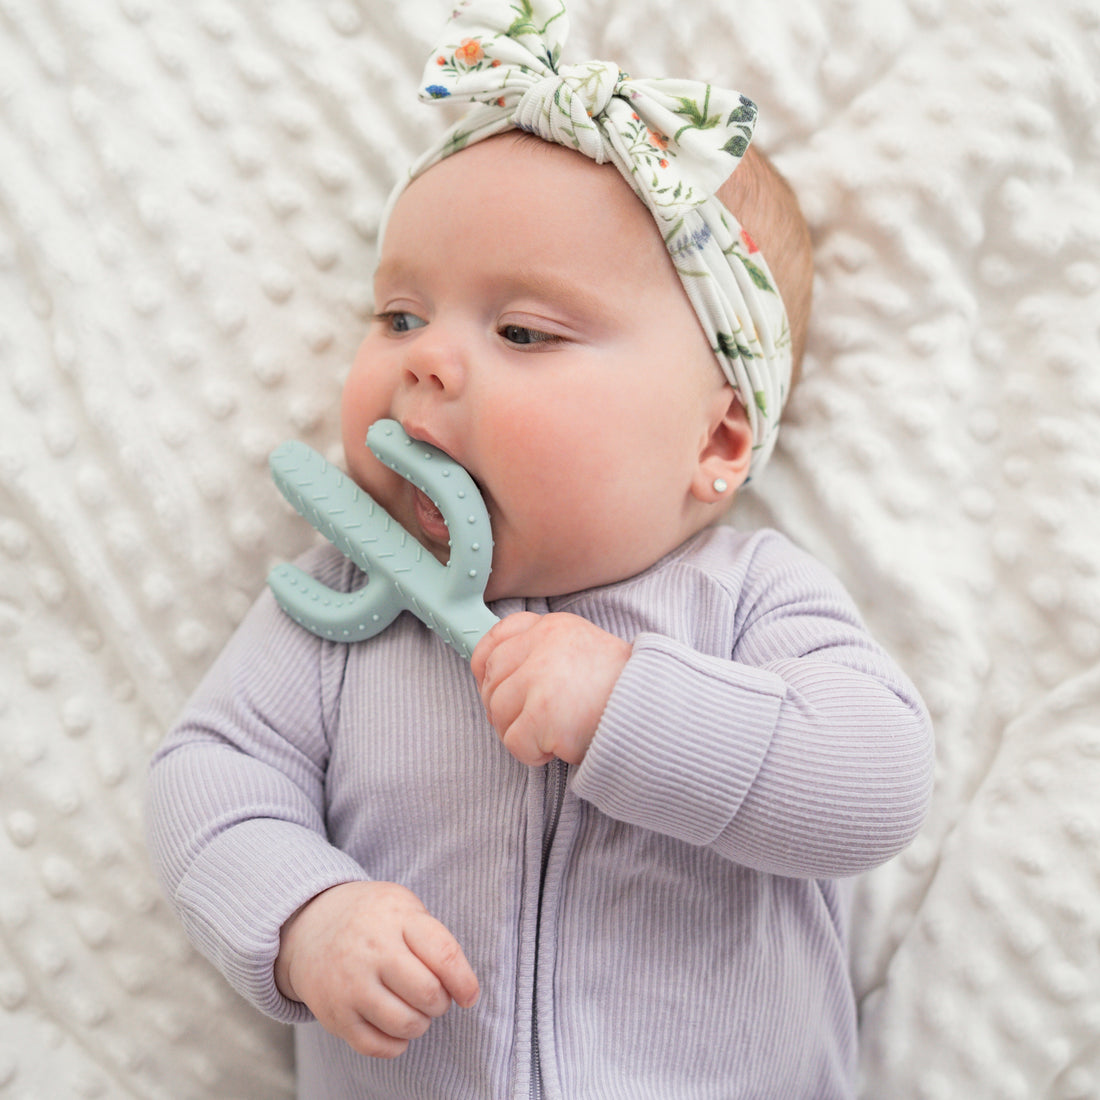 Baby chewing on cactus teether toy